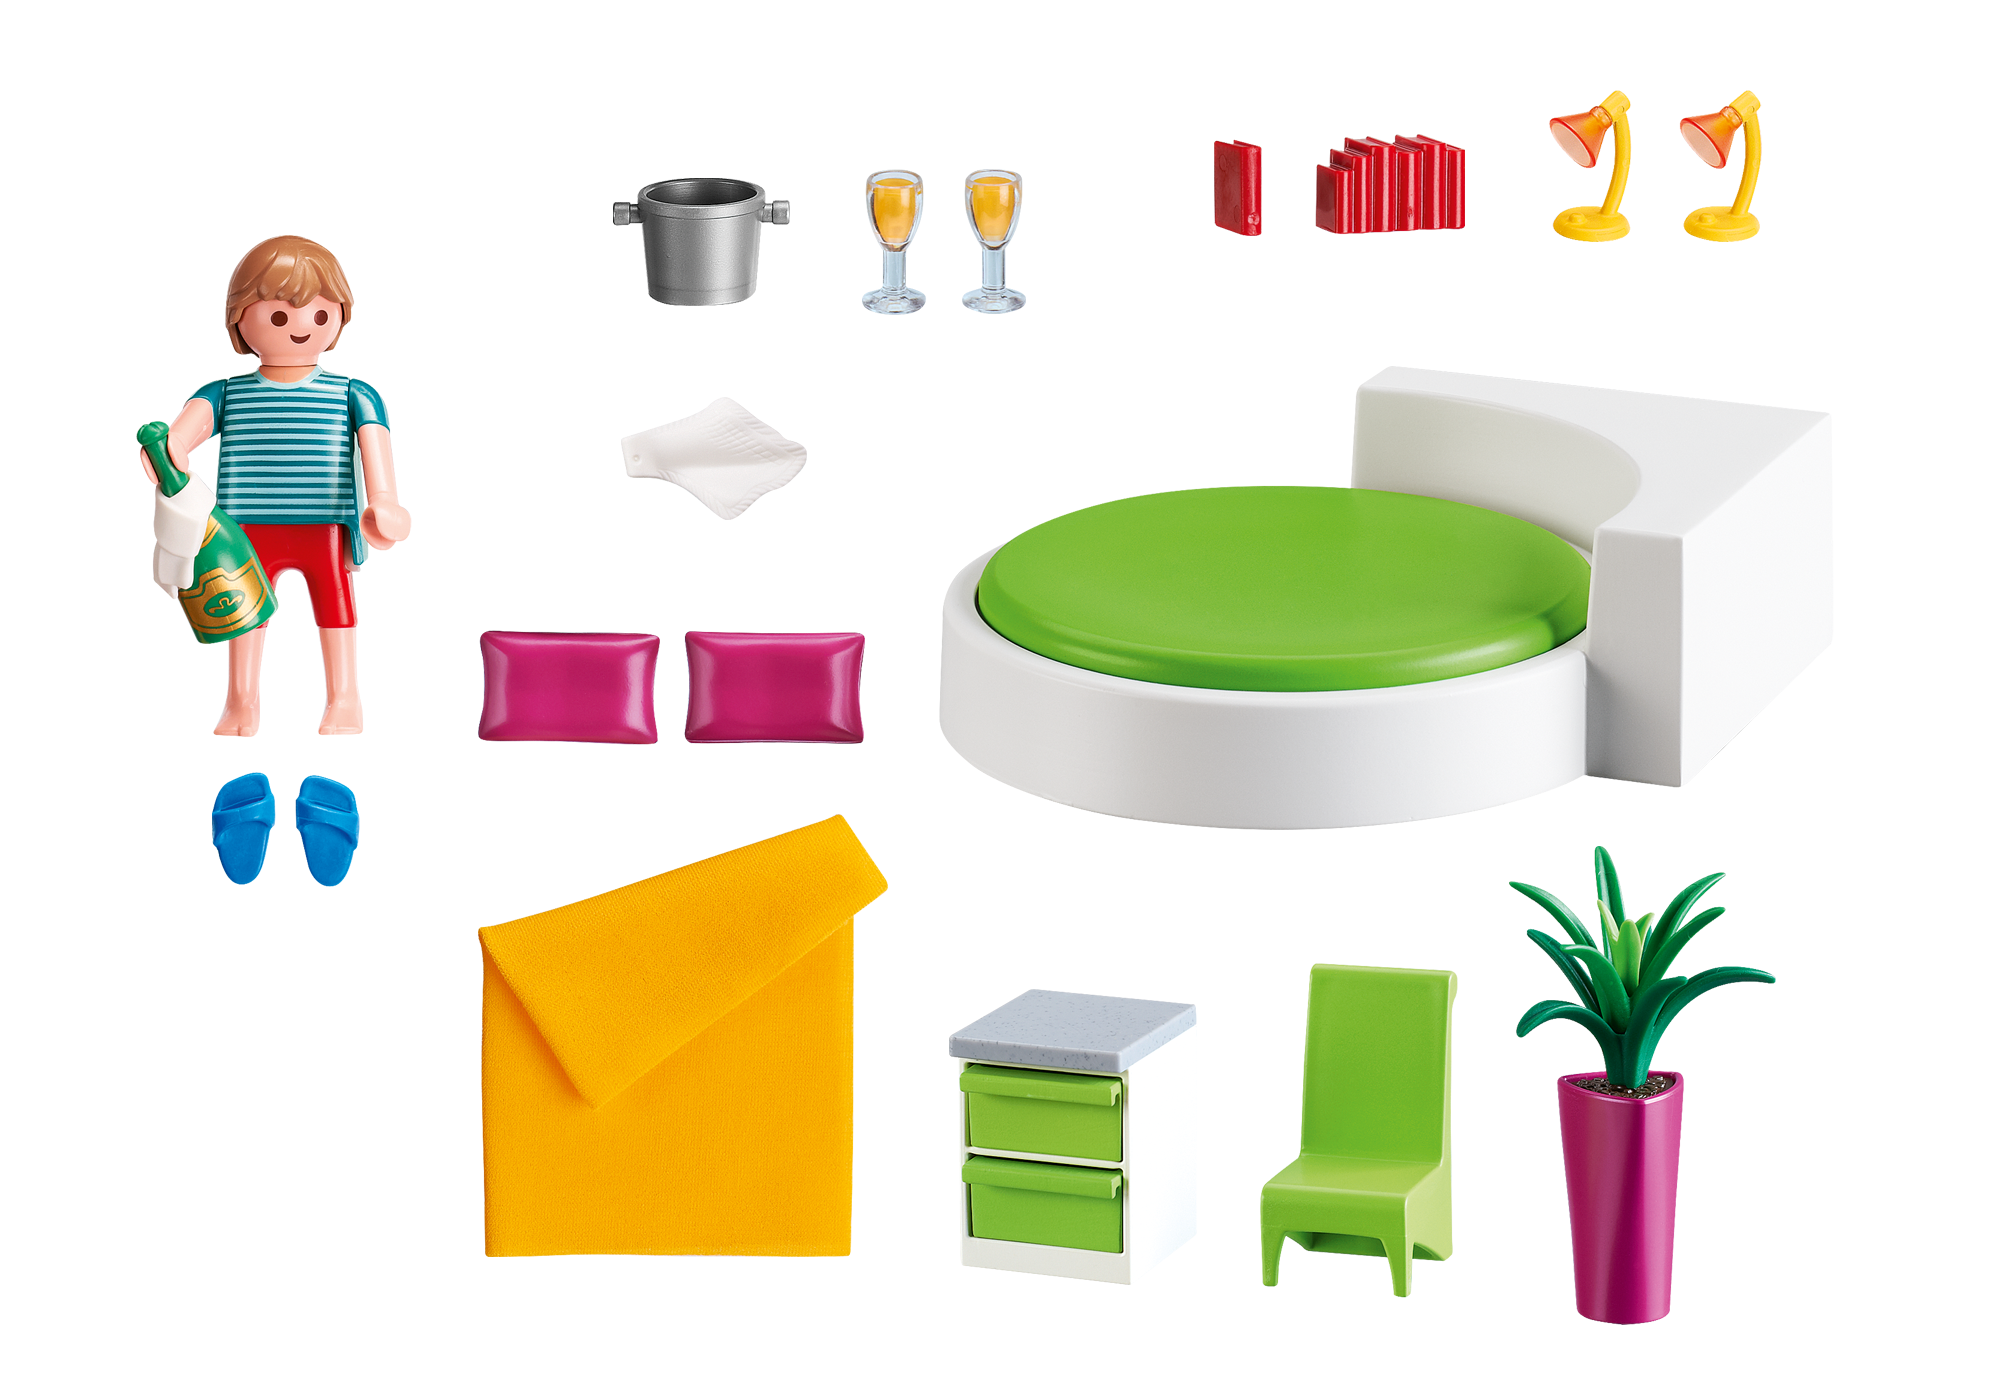 playmobil chambre adulte